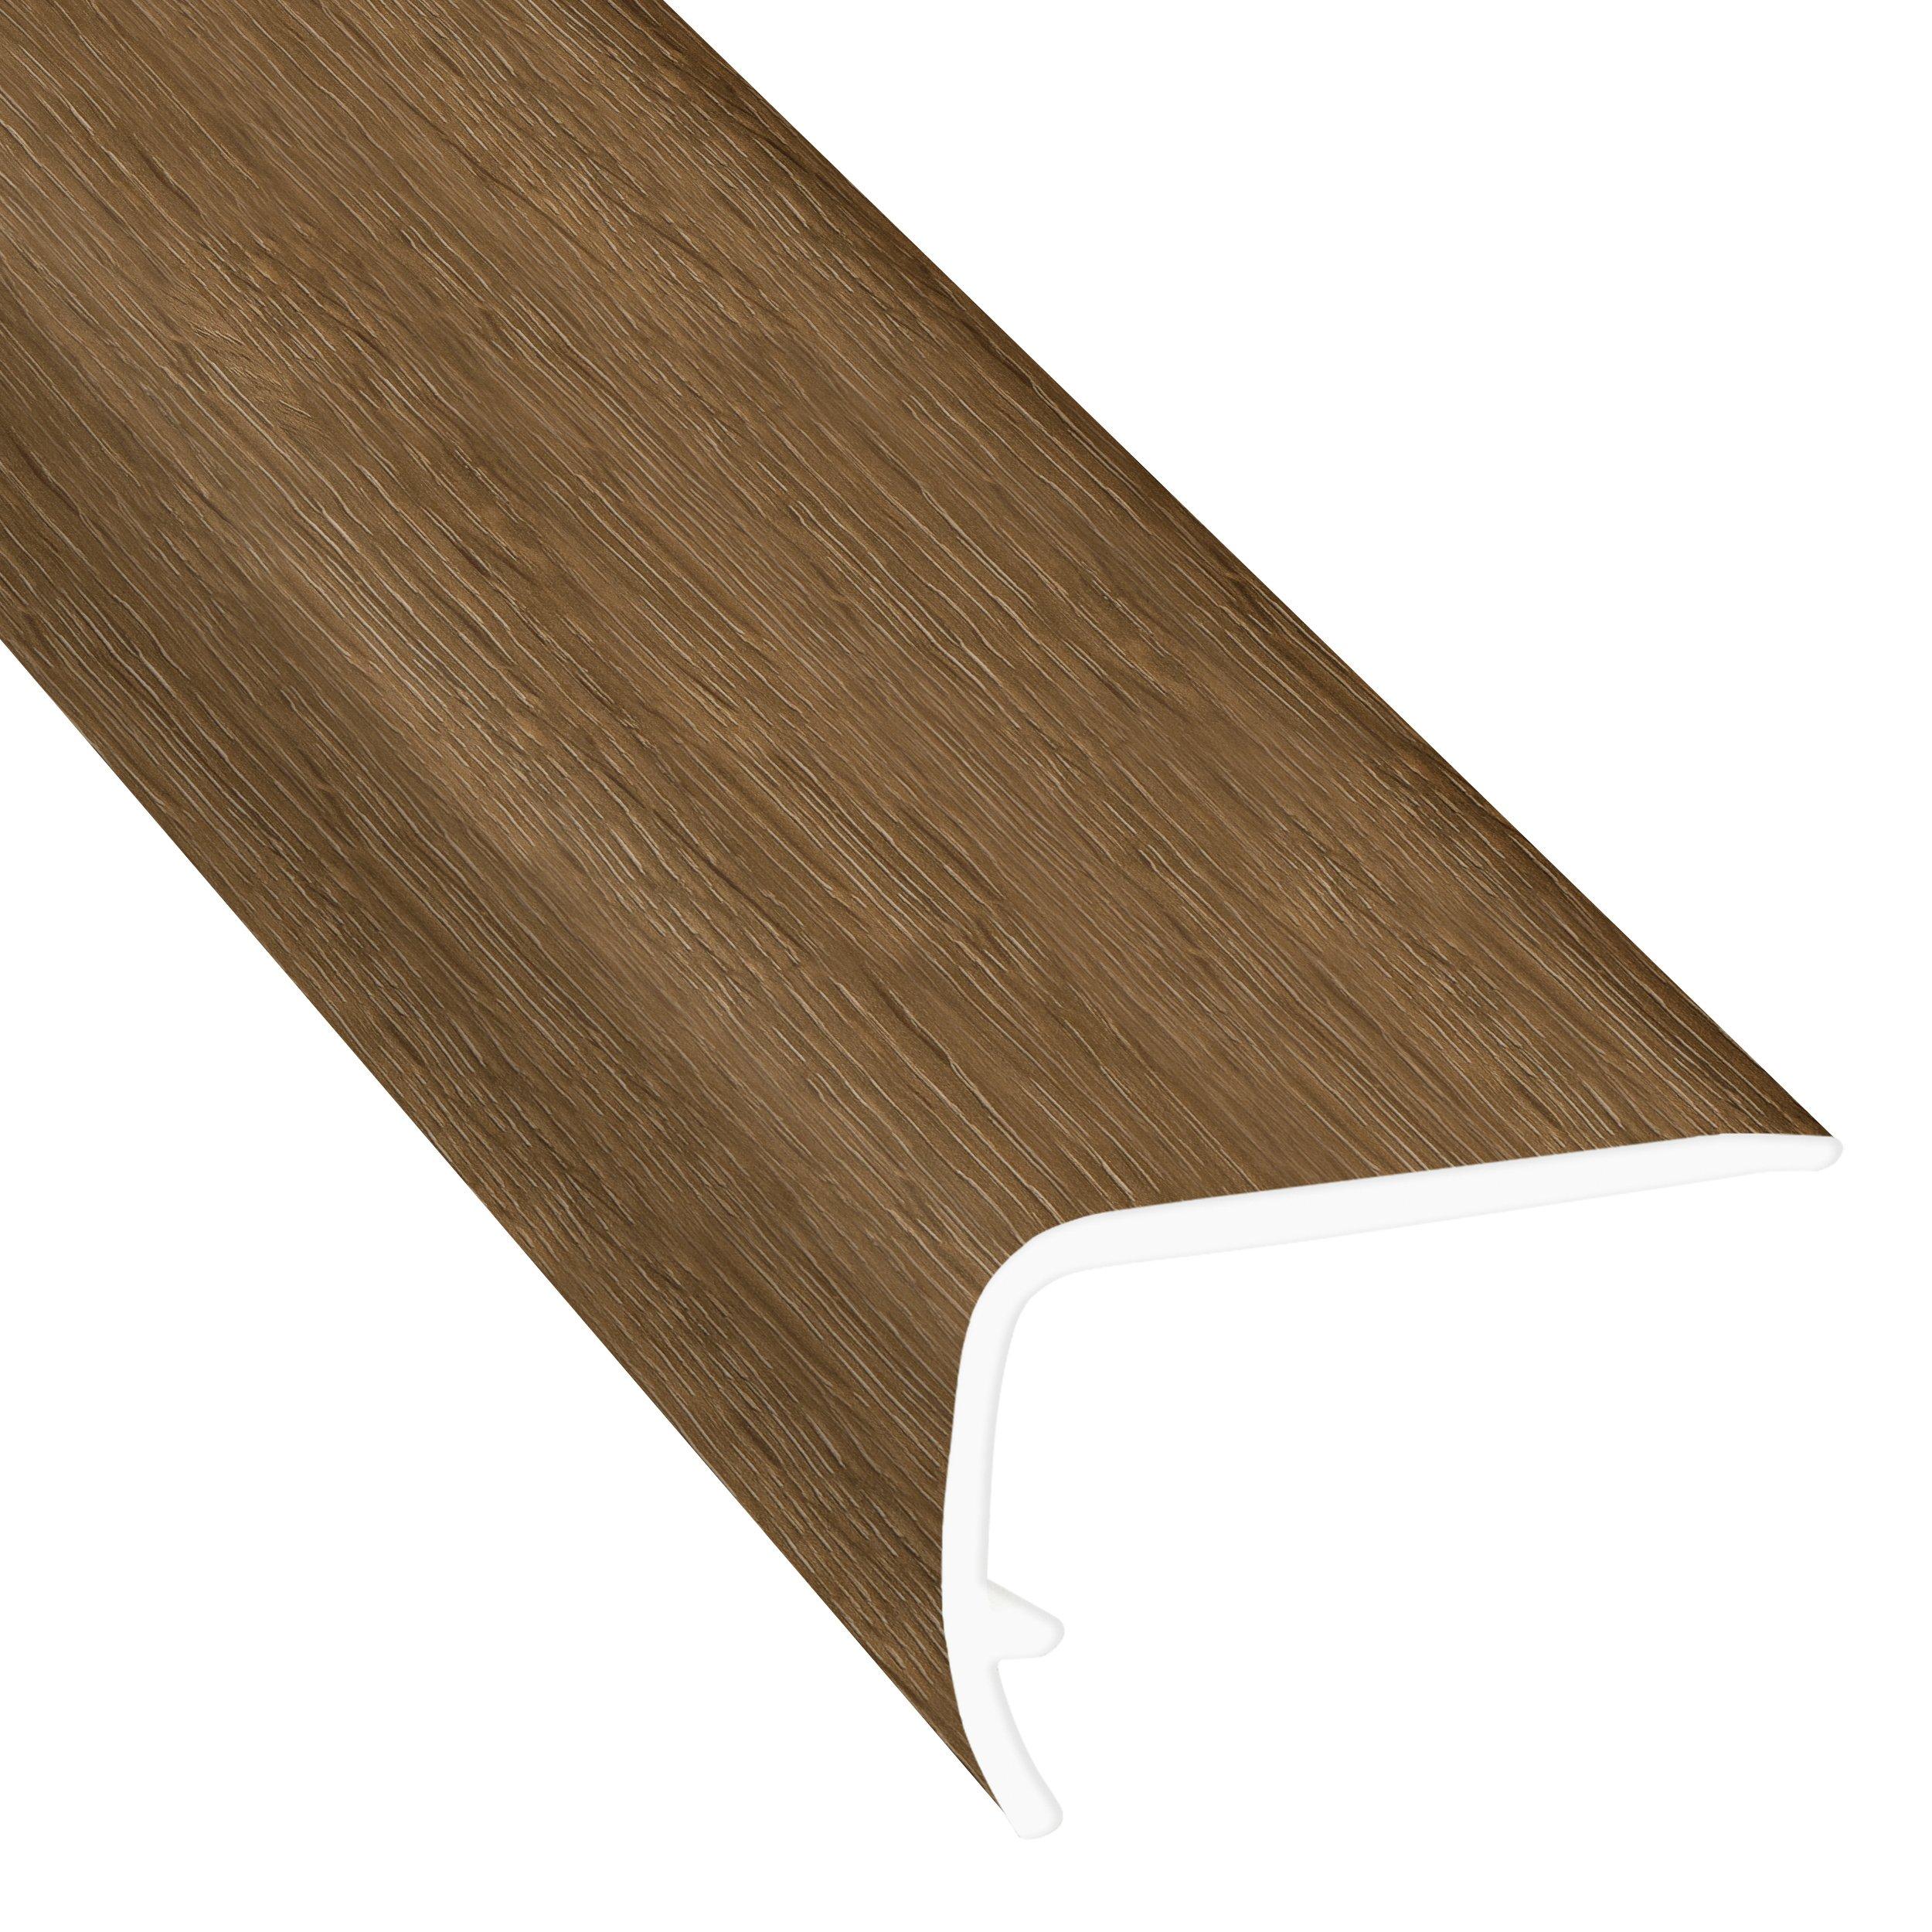 Madeline Maple 94in. Vinyl Overlapping Stair Nose